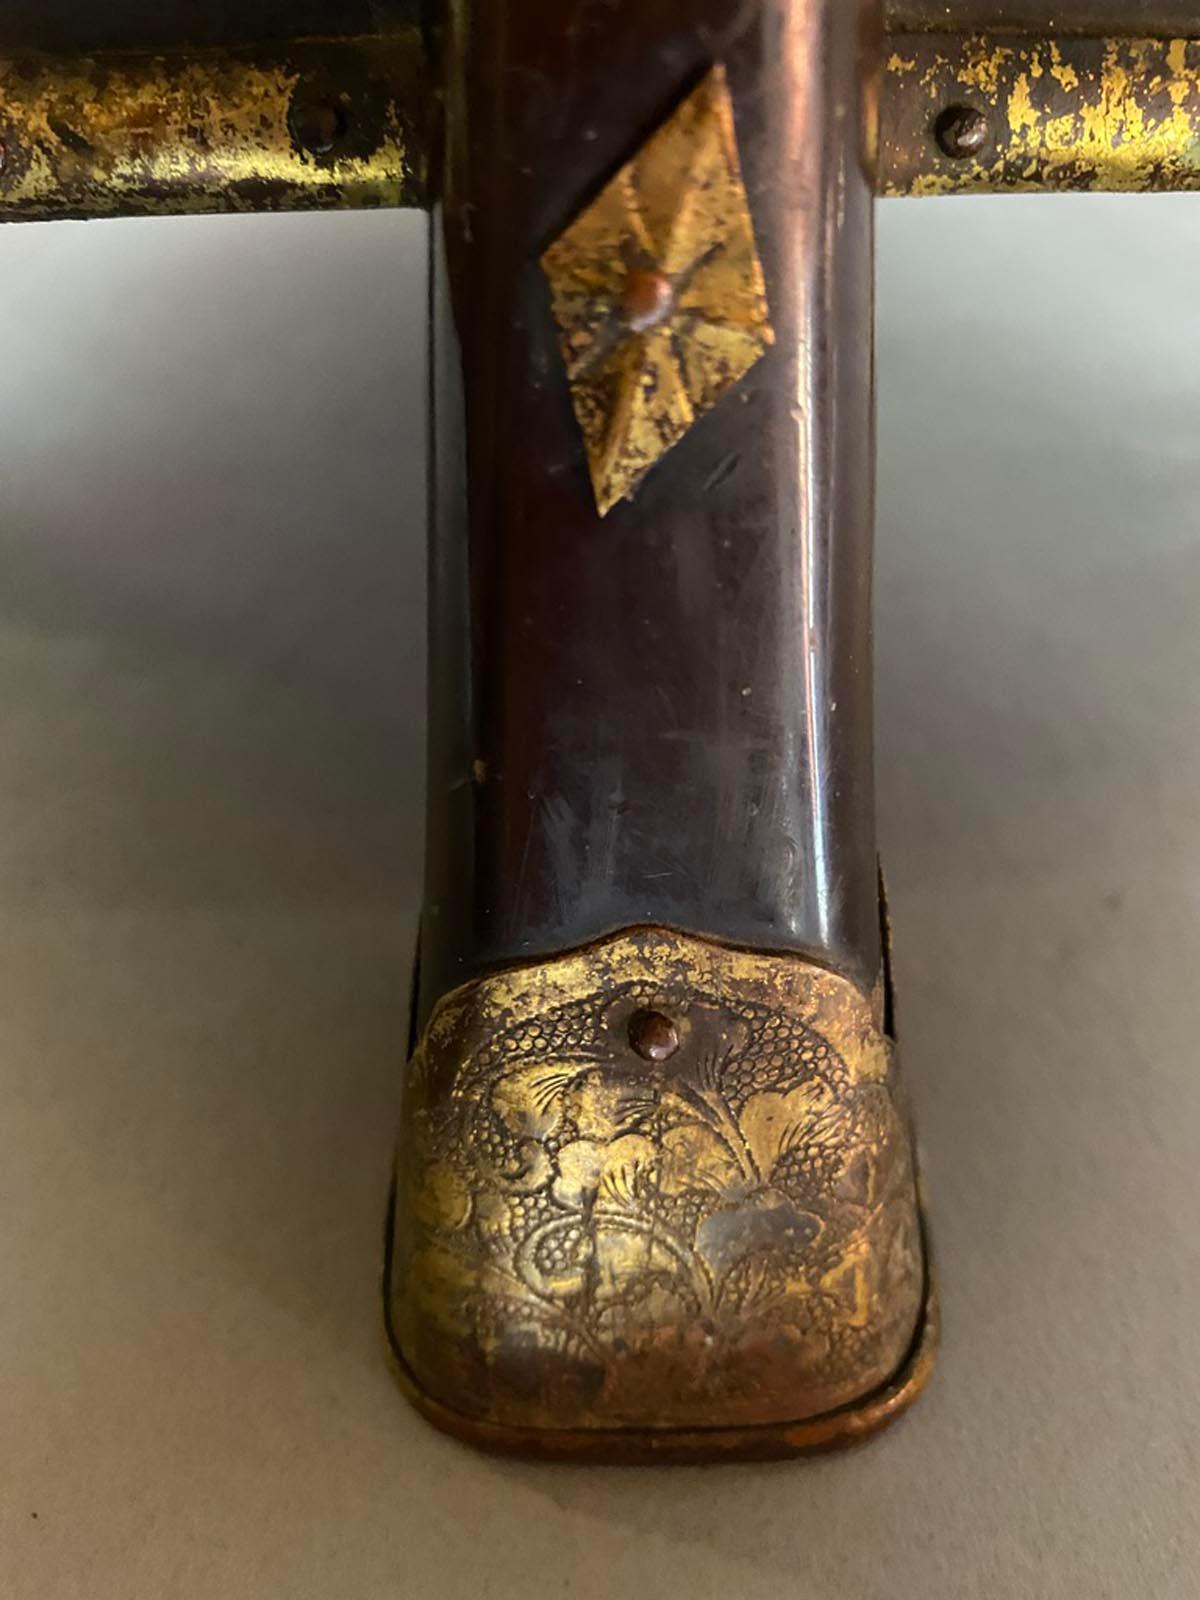 Edo period Hokkai, lacquered and painted box. Beautifully painted gold flowers painted o lacquer. Rope can be removed. Brass over copper intricately hammered details on feet and throughout box. Can be used as a small side table and for storage.